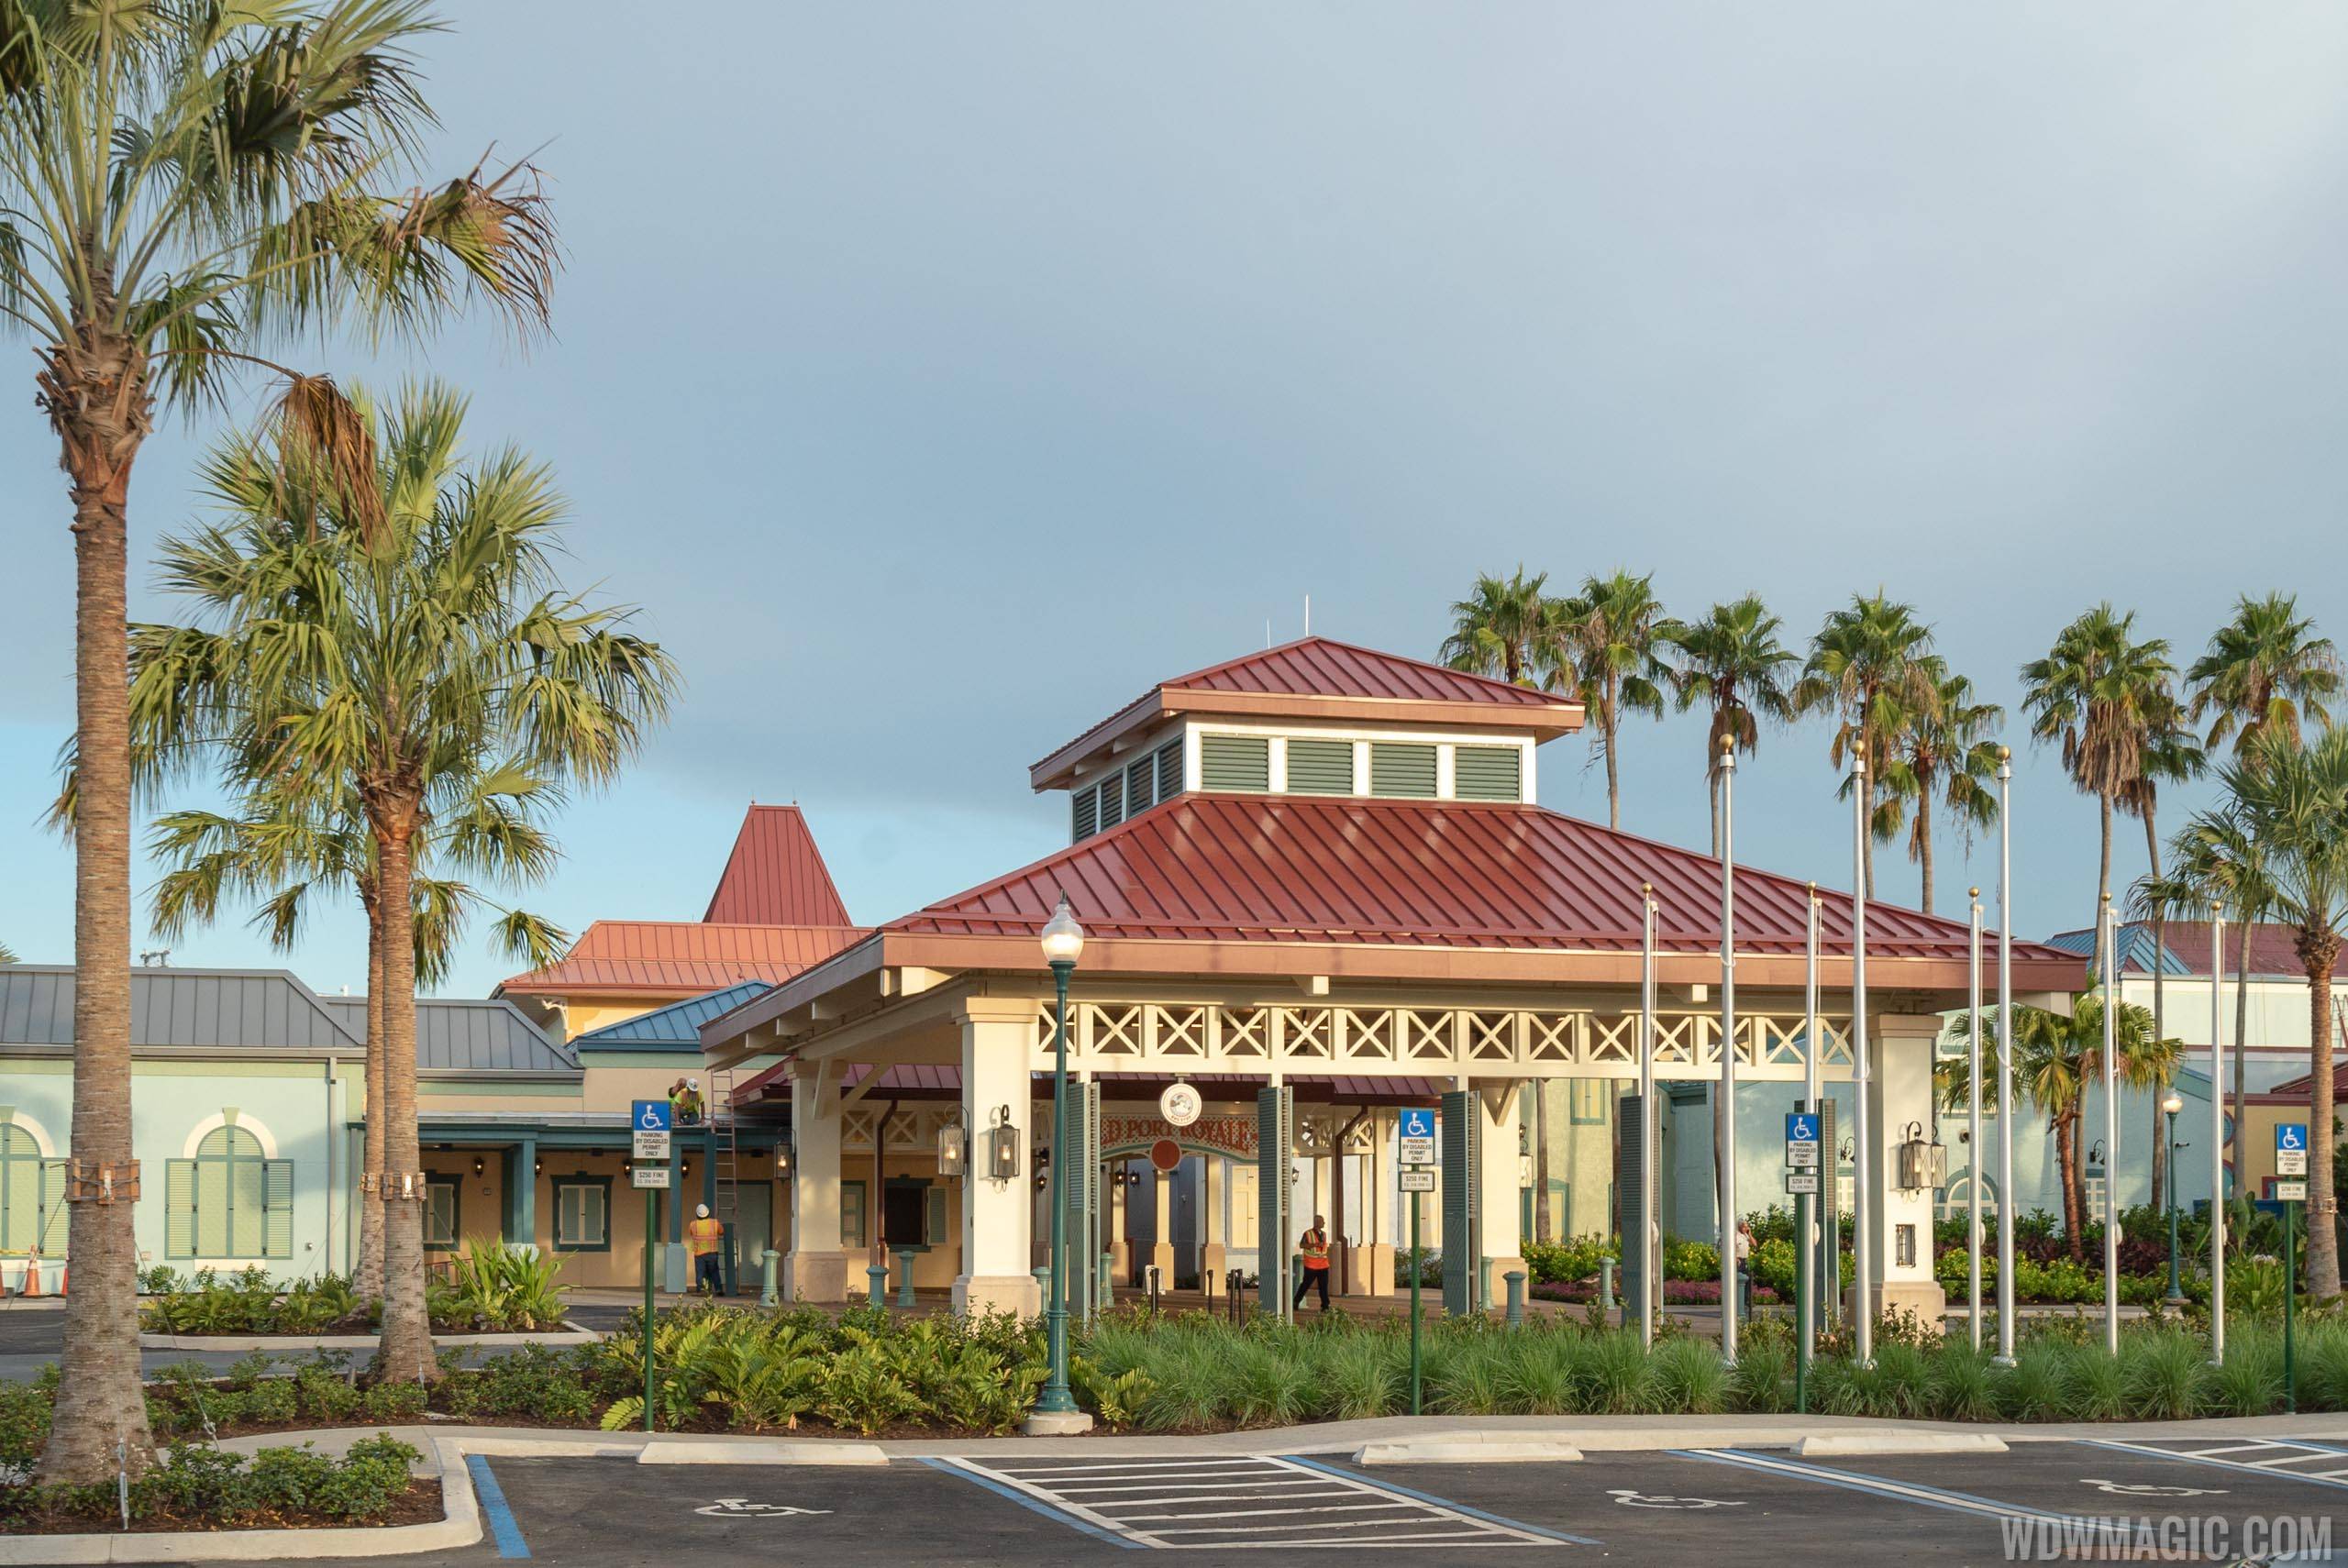 PHOTOS - New Old Port Royale nears completion at Disney's Caribbean Beach Resort